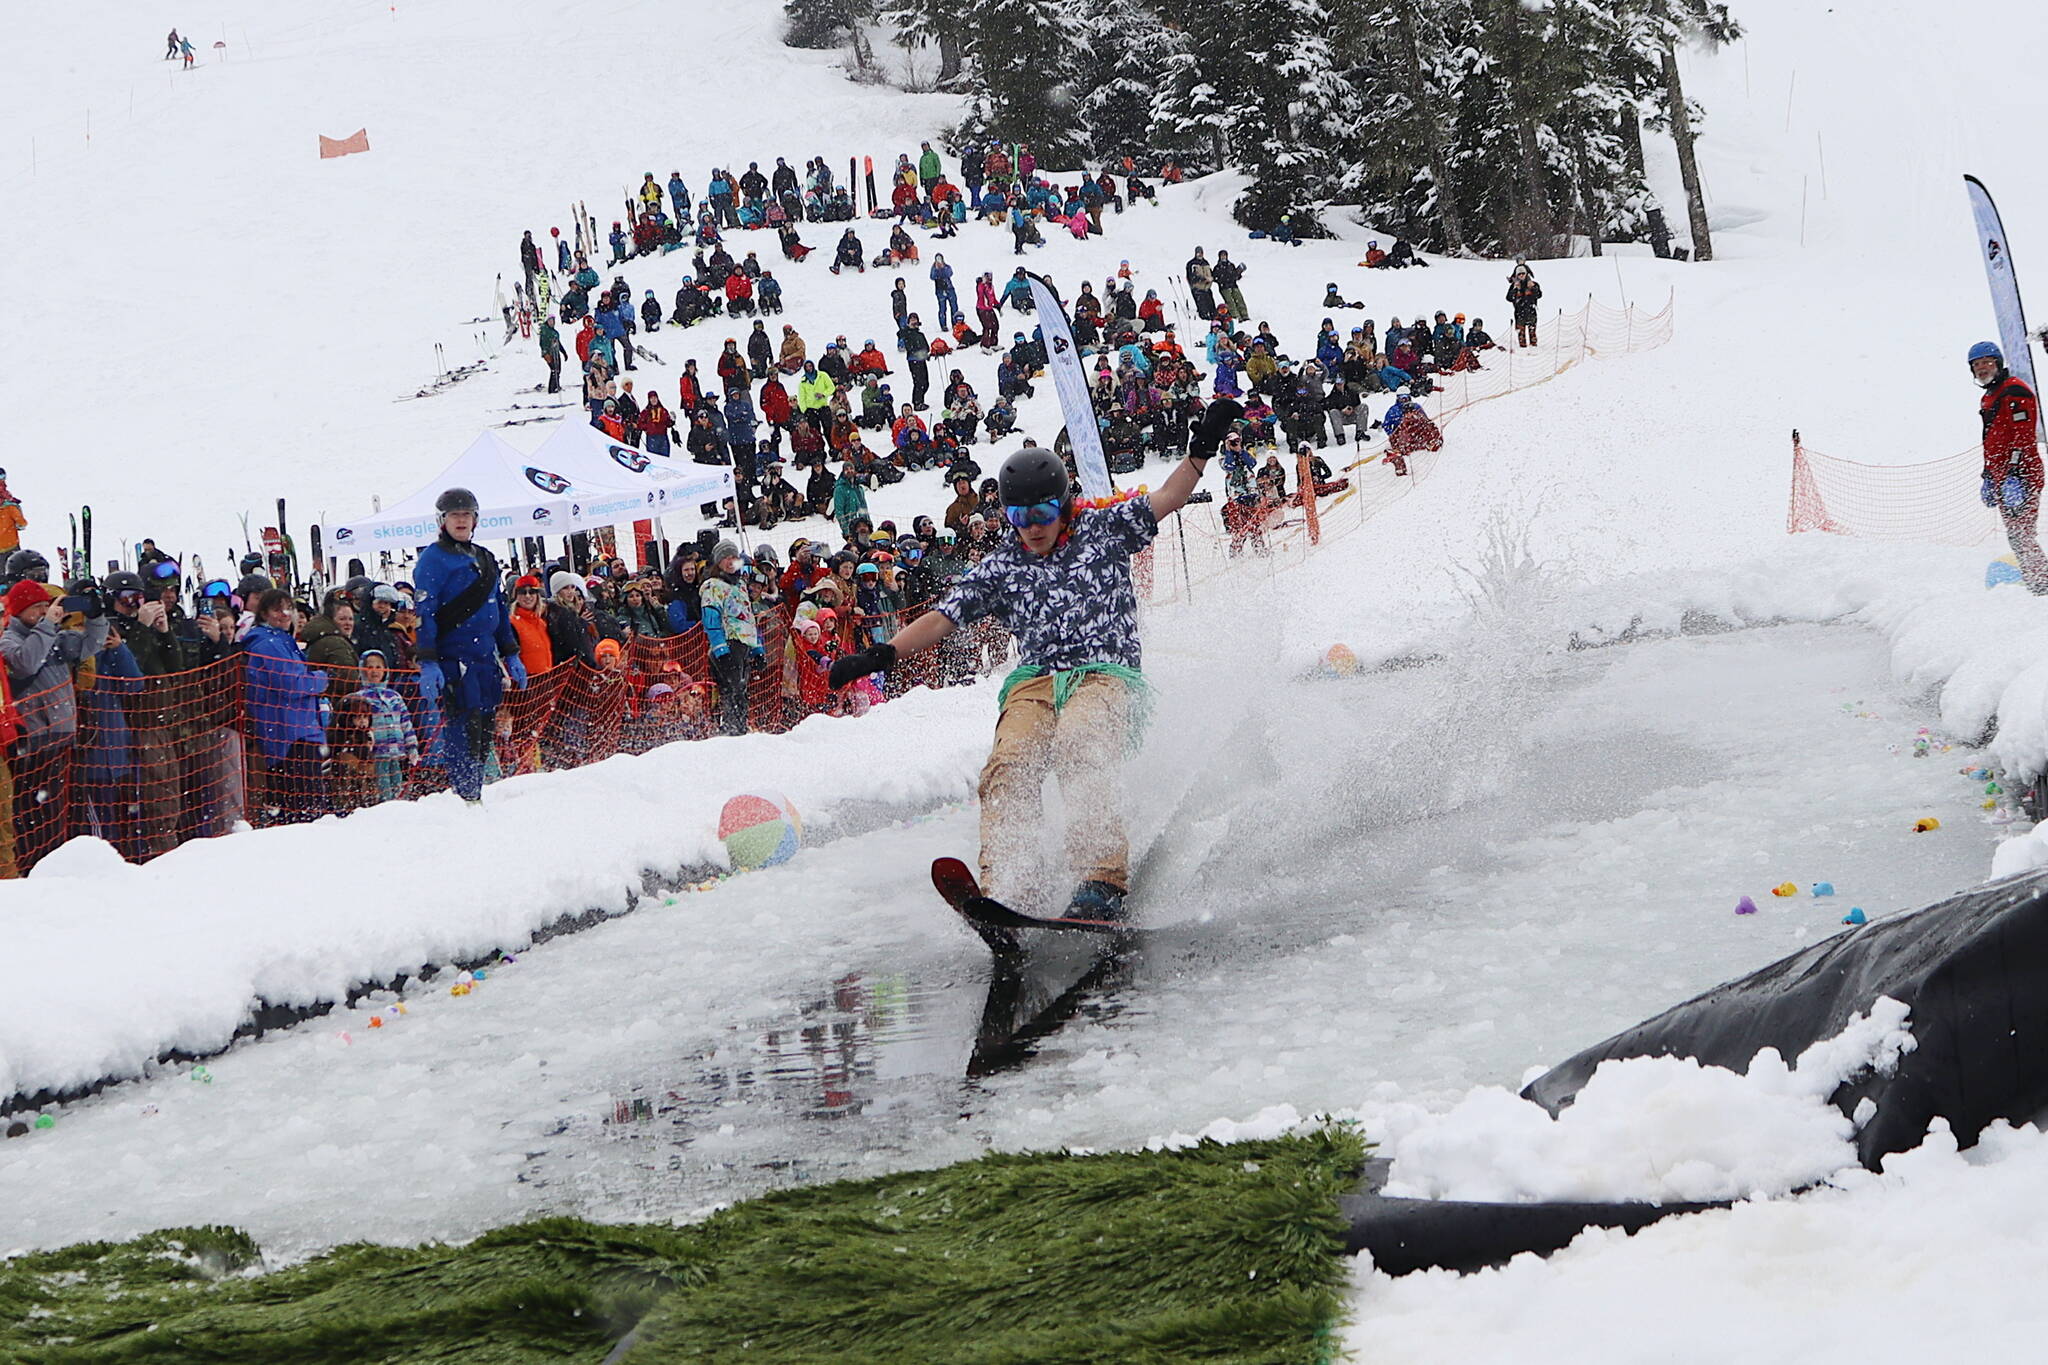 Elias Lowell, 15, balances his way to the end of the pond during the annual Slush Cup at Eaglecrest Ski Area on Sunday, the last day of what officials called and up-and-down season. (Mark Sabbatini / Juneau Empire)